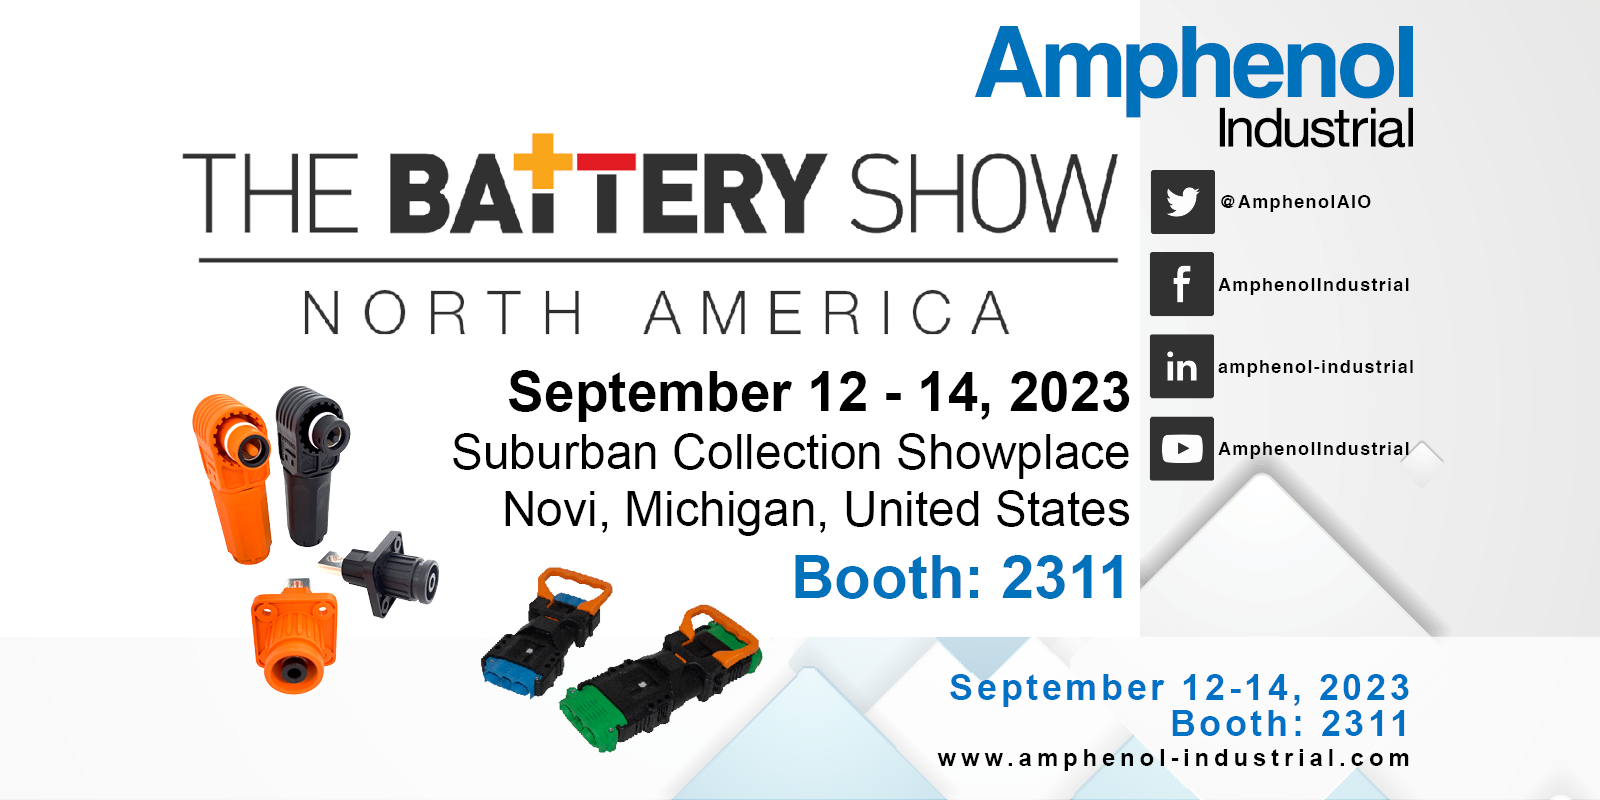 Featured image for “The Battery Show North America 2023”